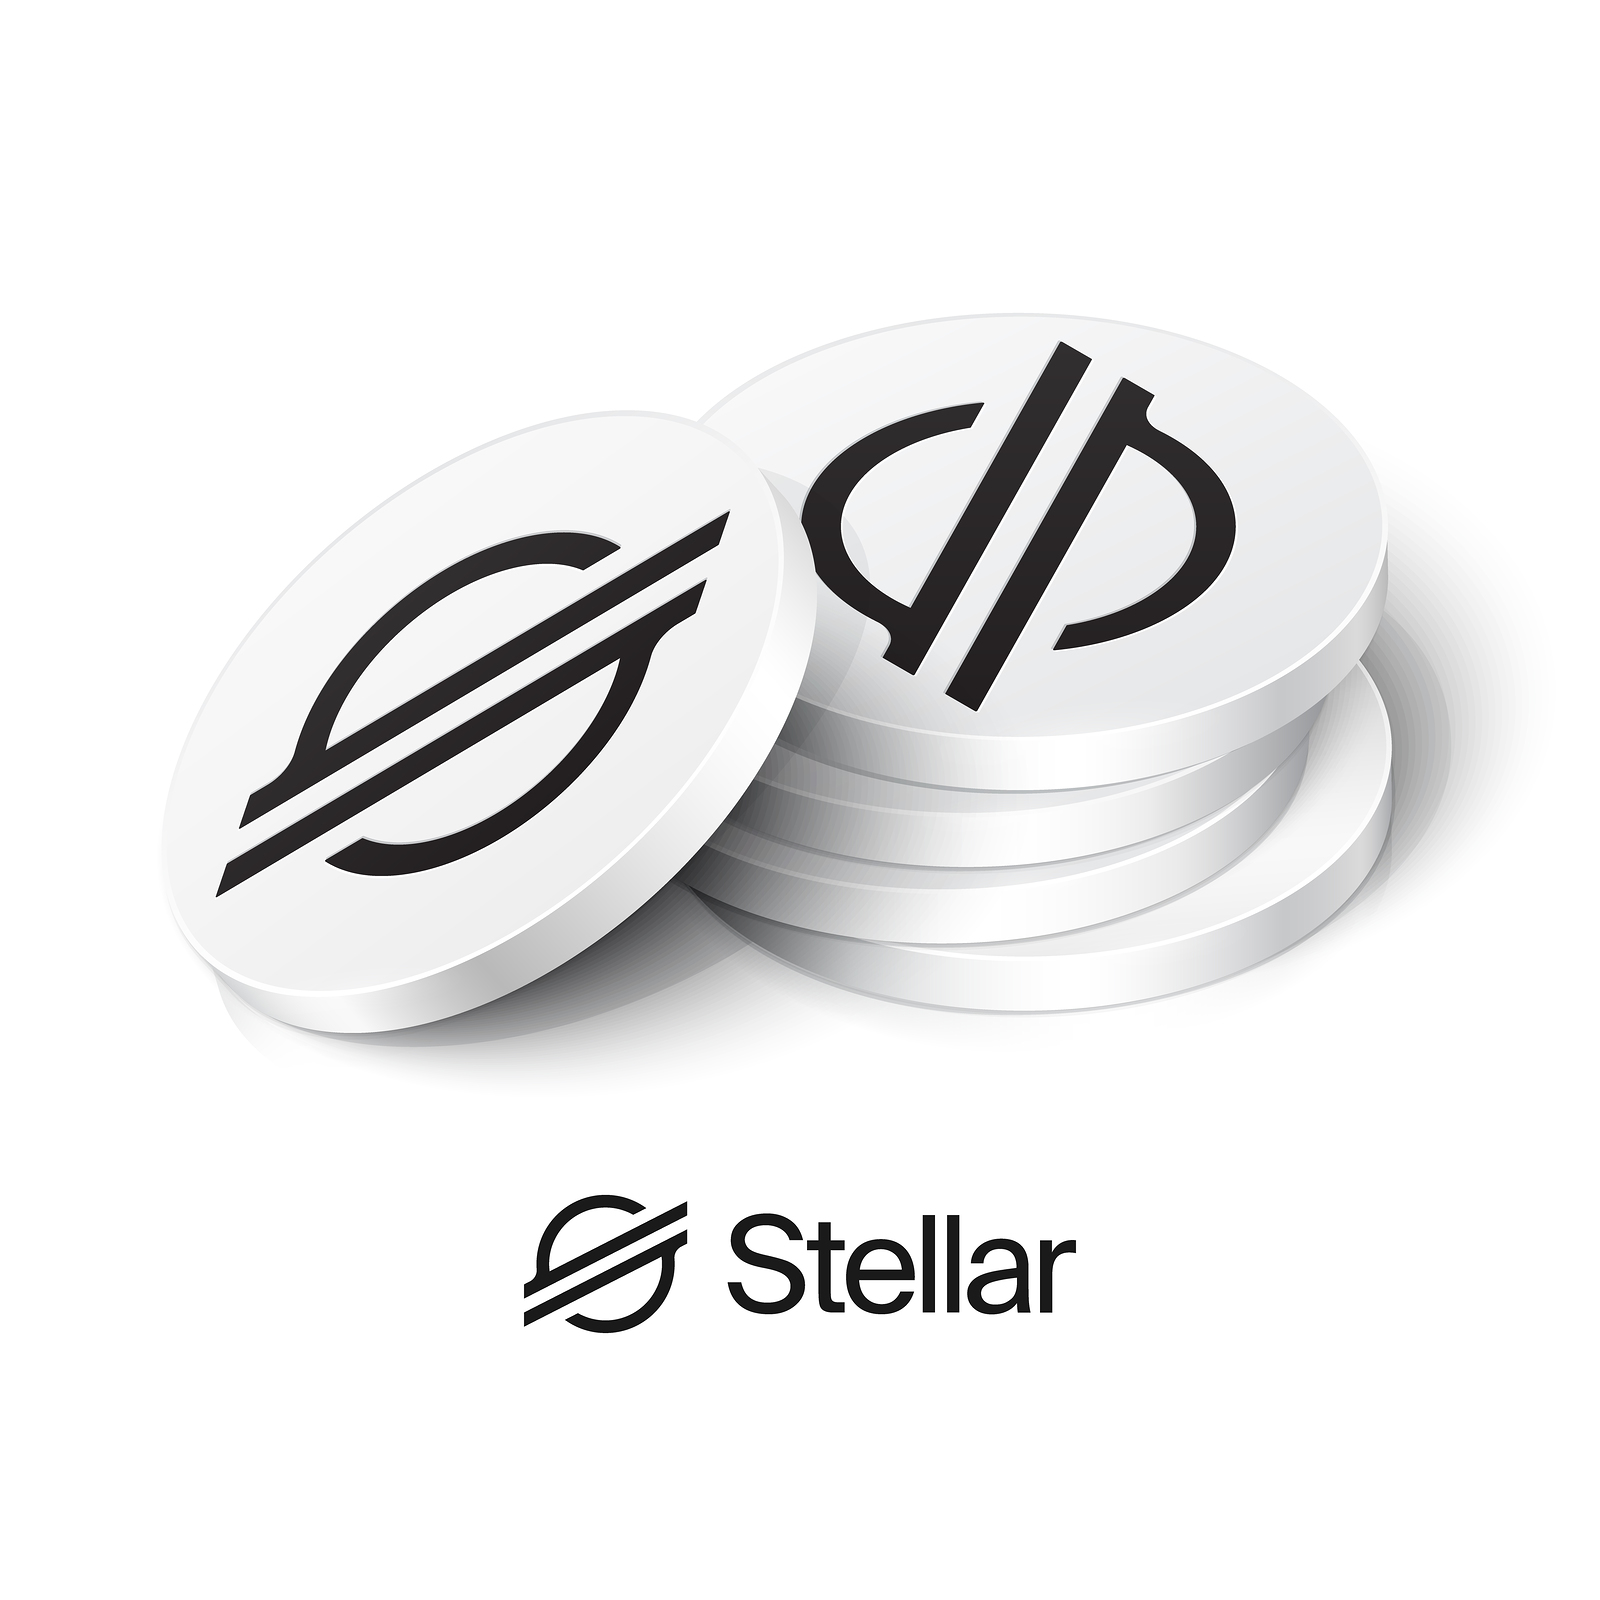 19-surprising-facts-about-stellar-xlm